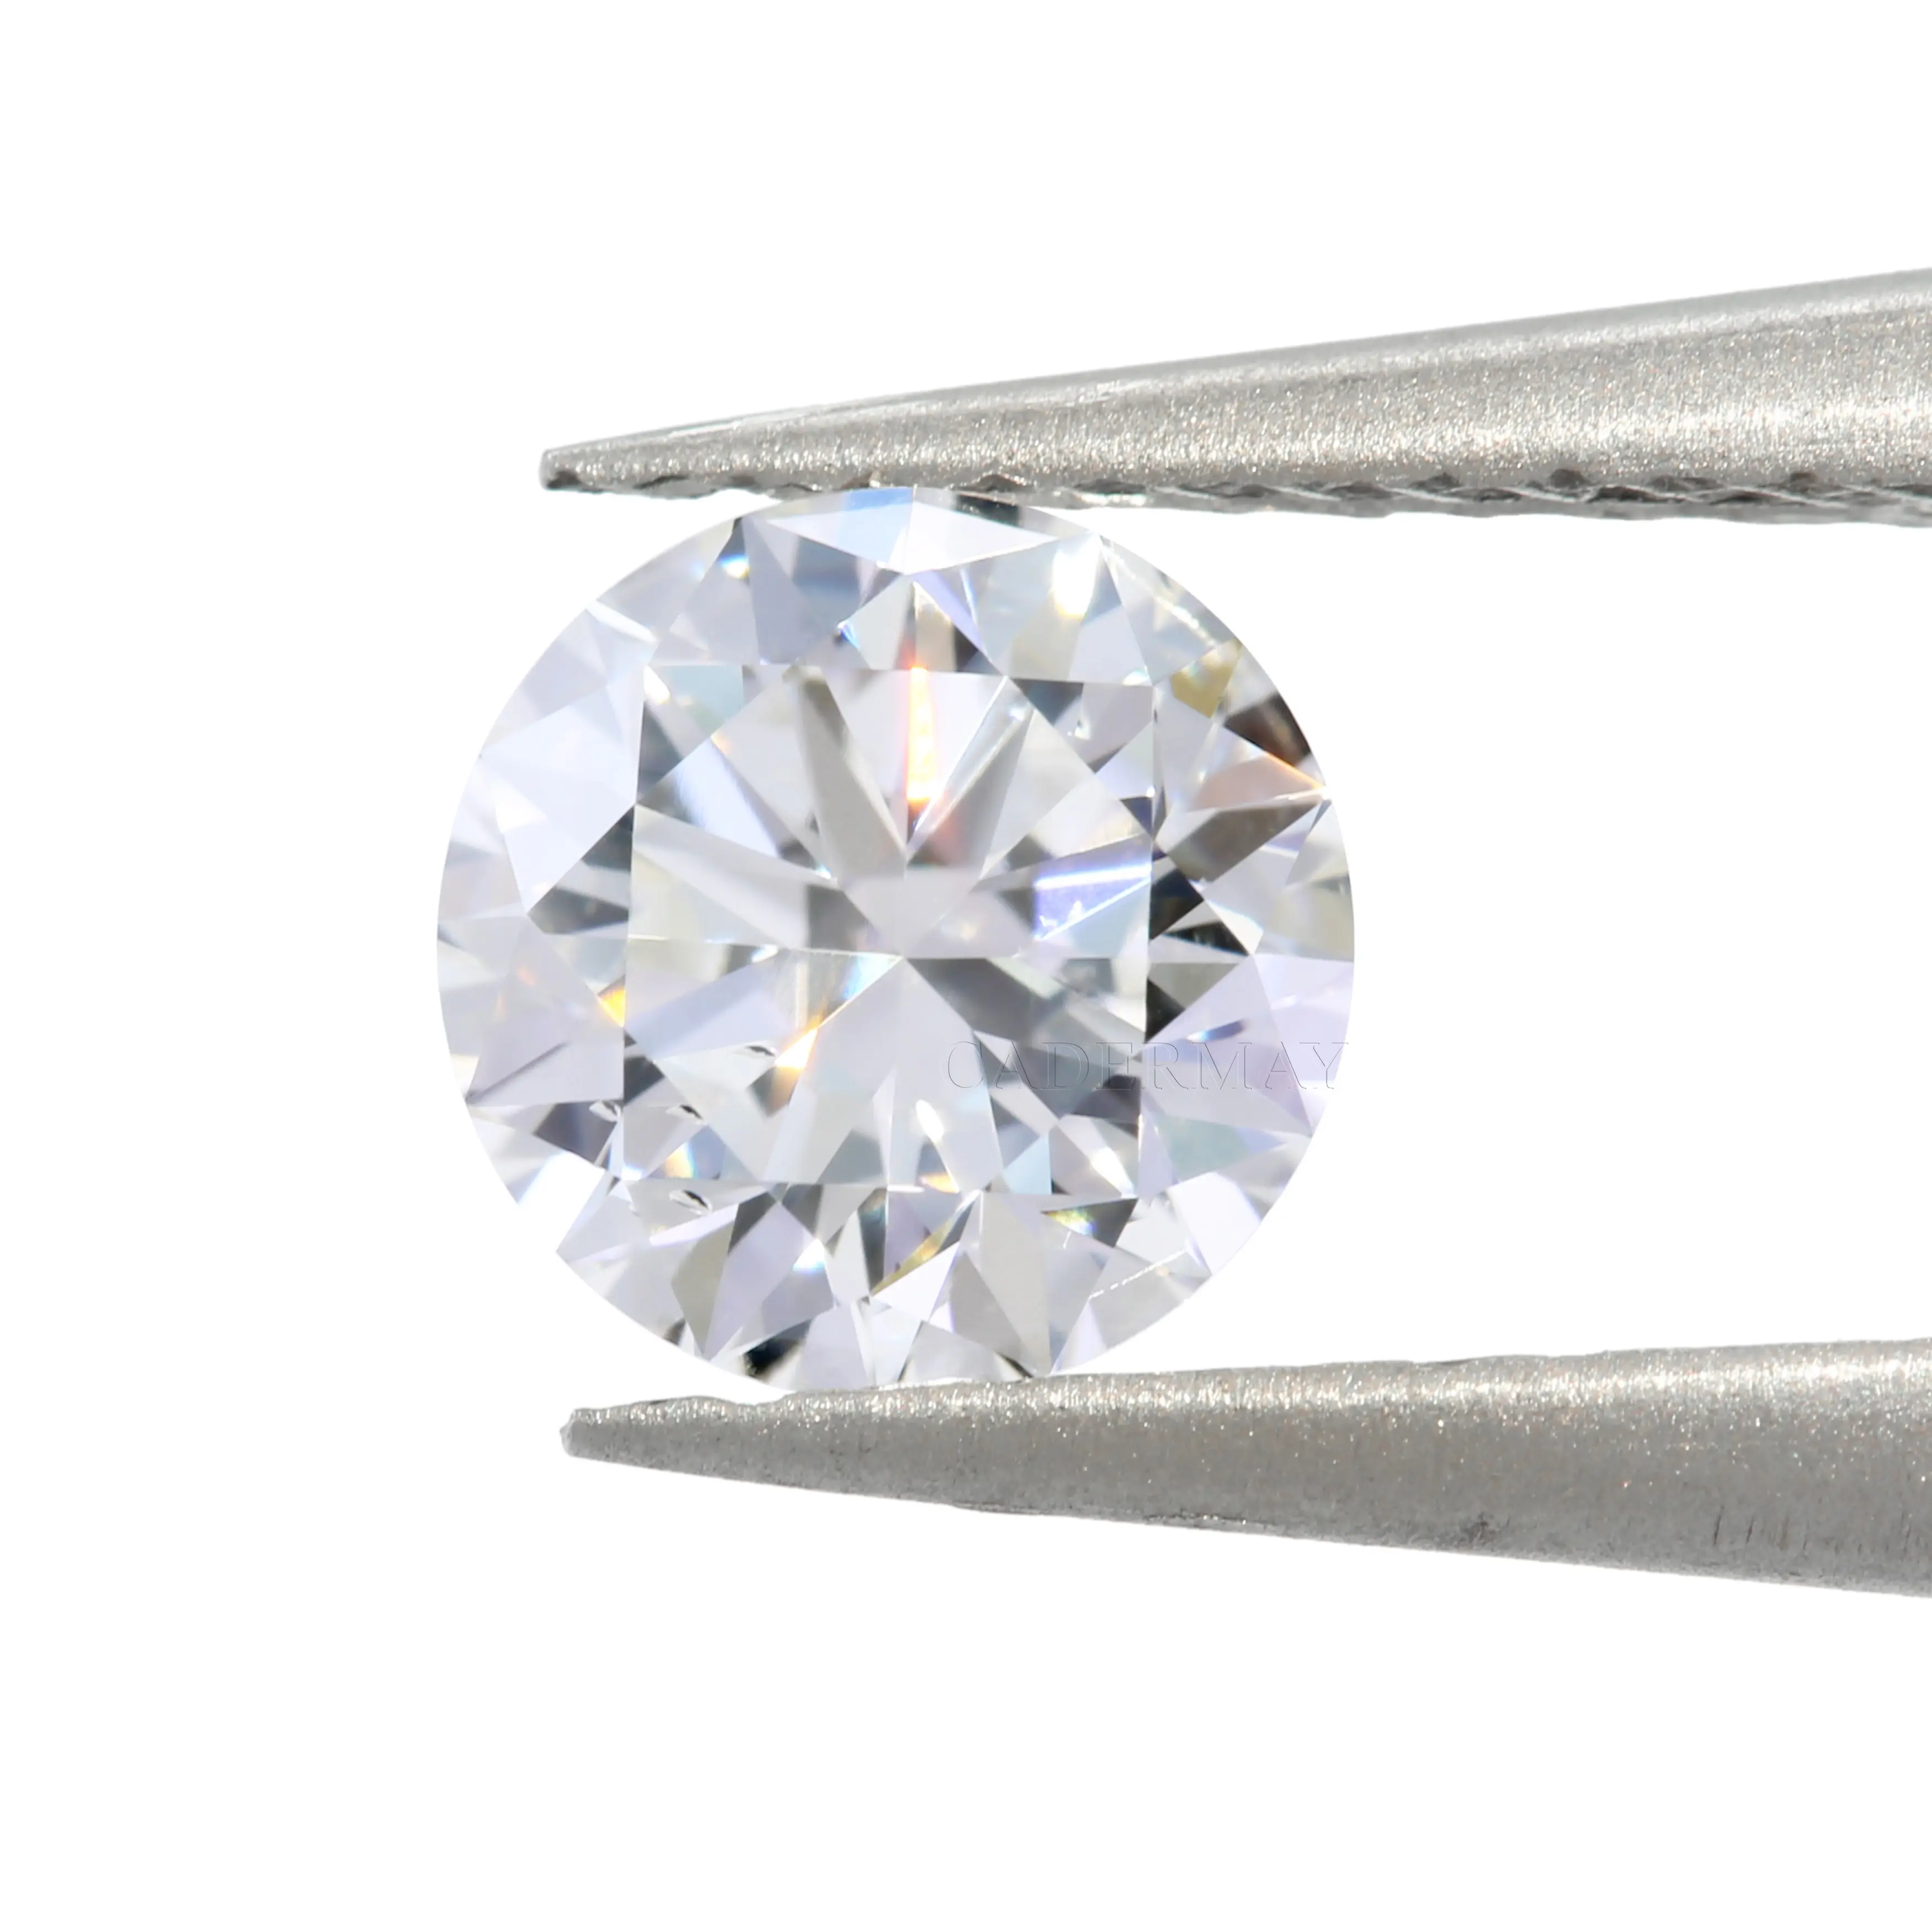 Factory Prices CVD HPHT Loose Lab Grown Diamonds 1ct 1.5ct 2ct 3ct DEF Color Synthetic Diamonds Loose GEMID Certificate